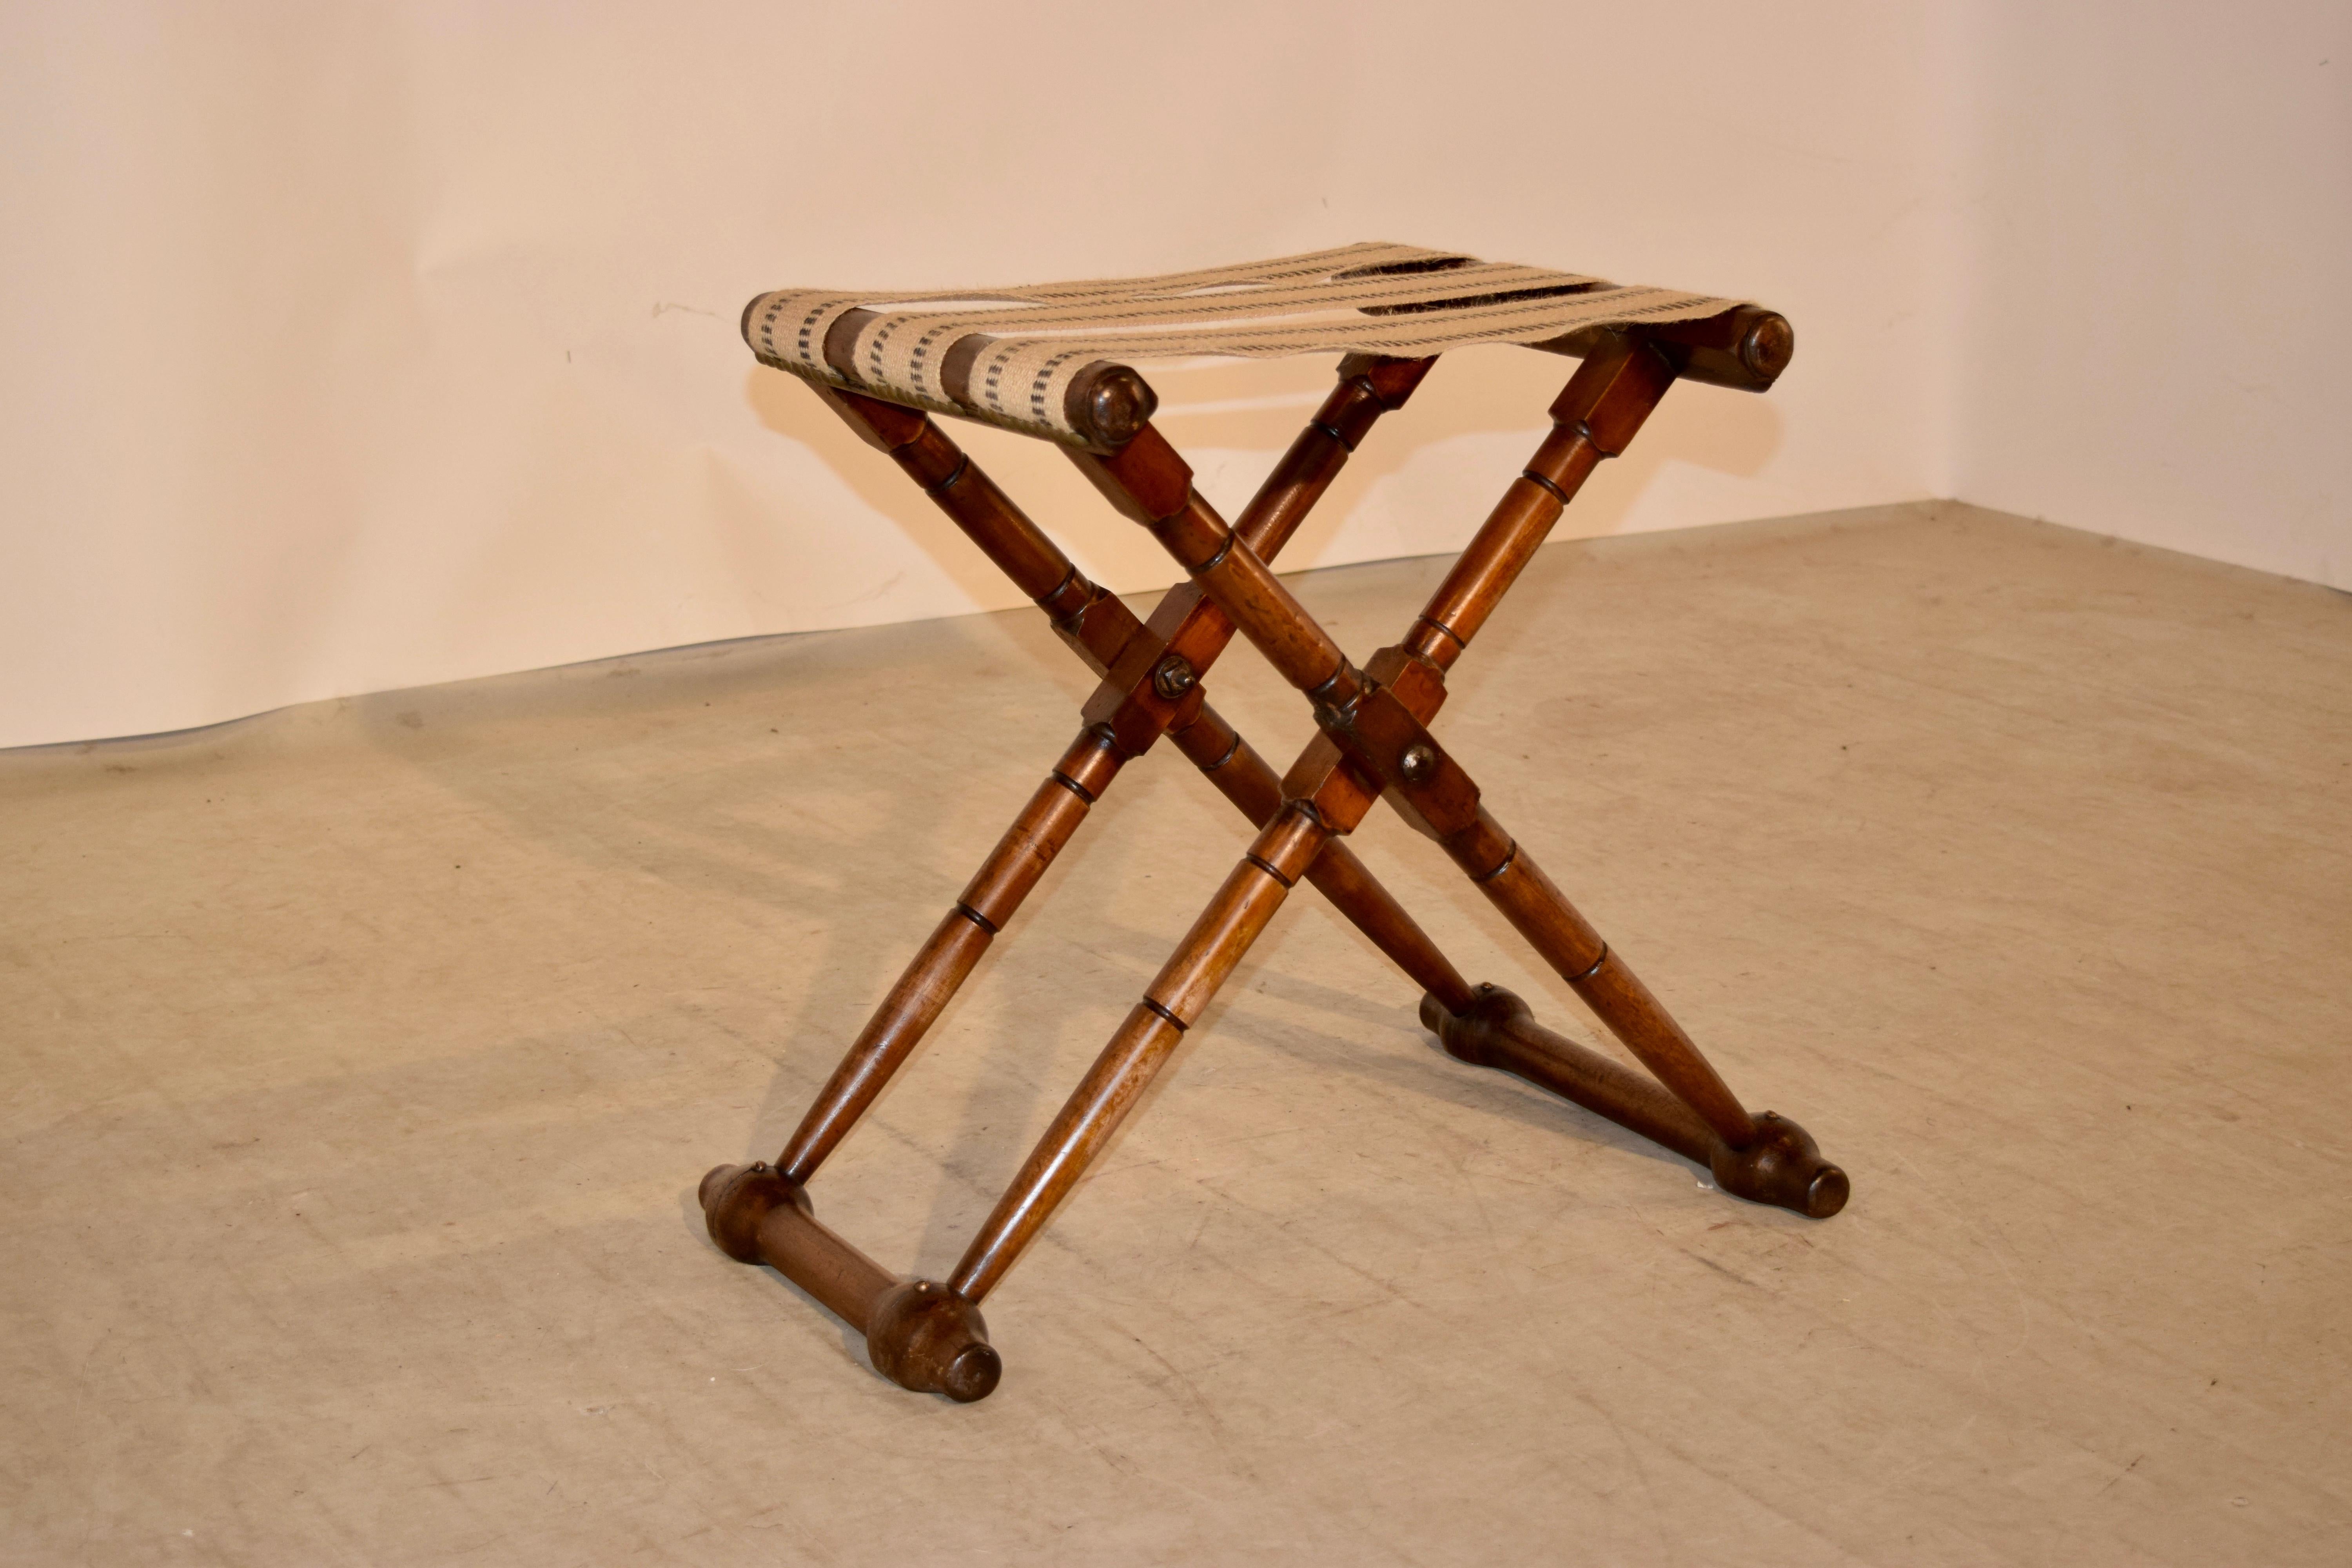 19th century folding luggage stand from England. The stand is made from mahogany and is hand-turned.